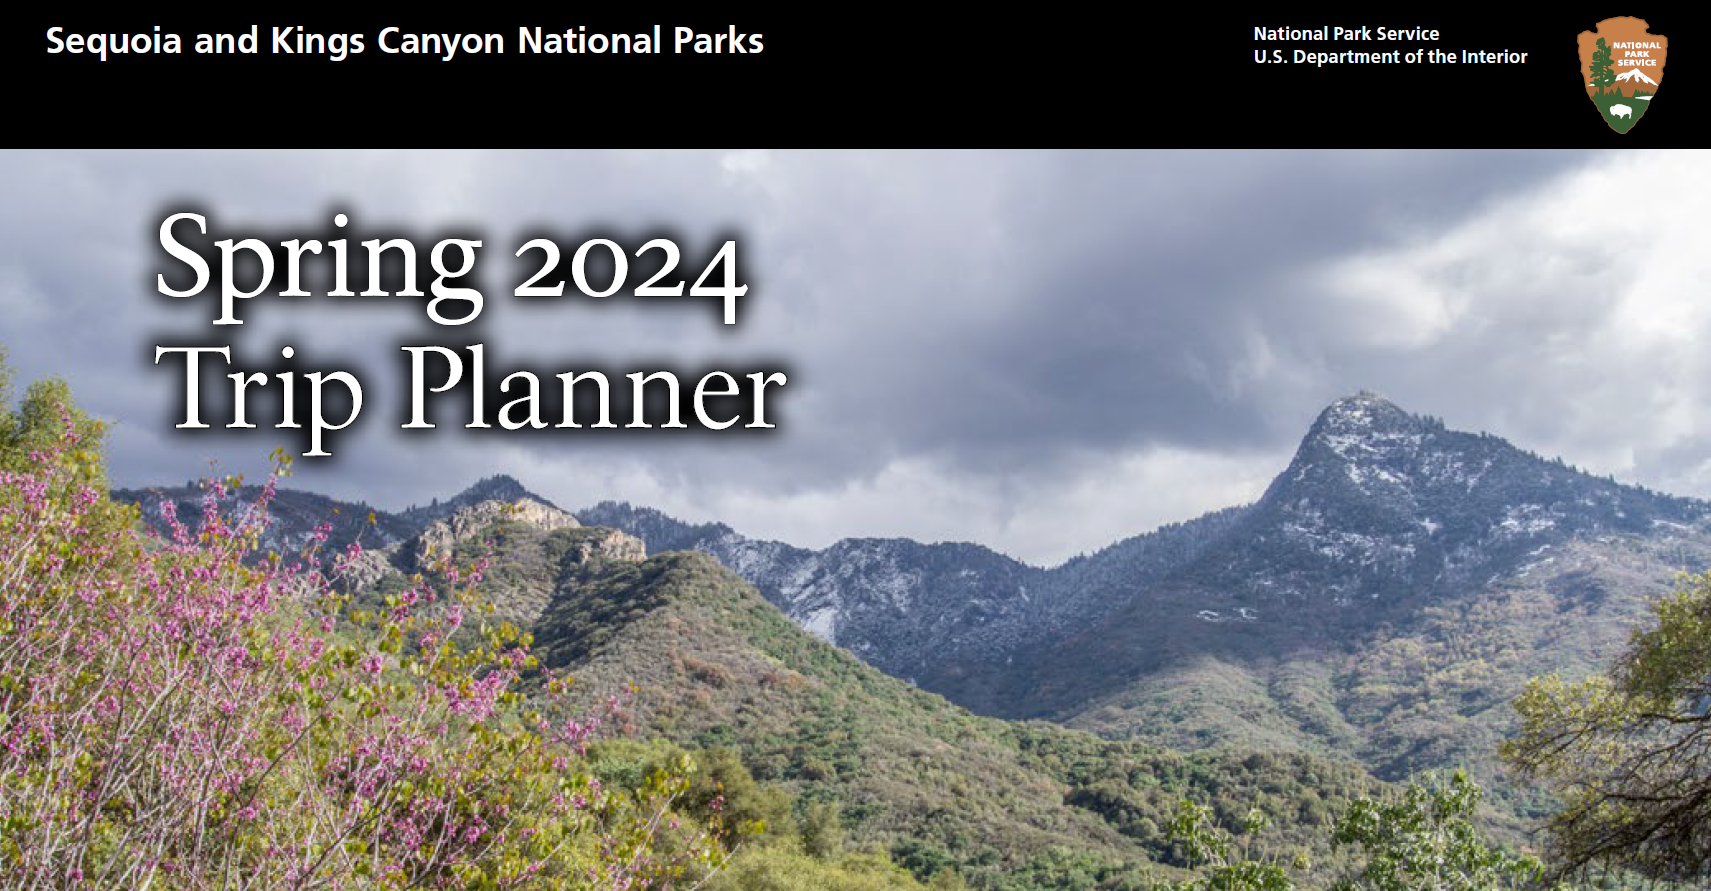 Dark clouds over a snowy mountain ridge, below which is a green hillside with purple buds on a bush. The words "Spring 2024 Trip Planner" is printed over the sky.